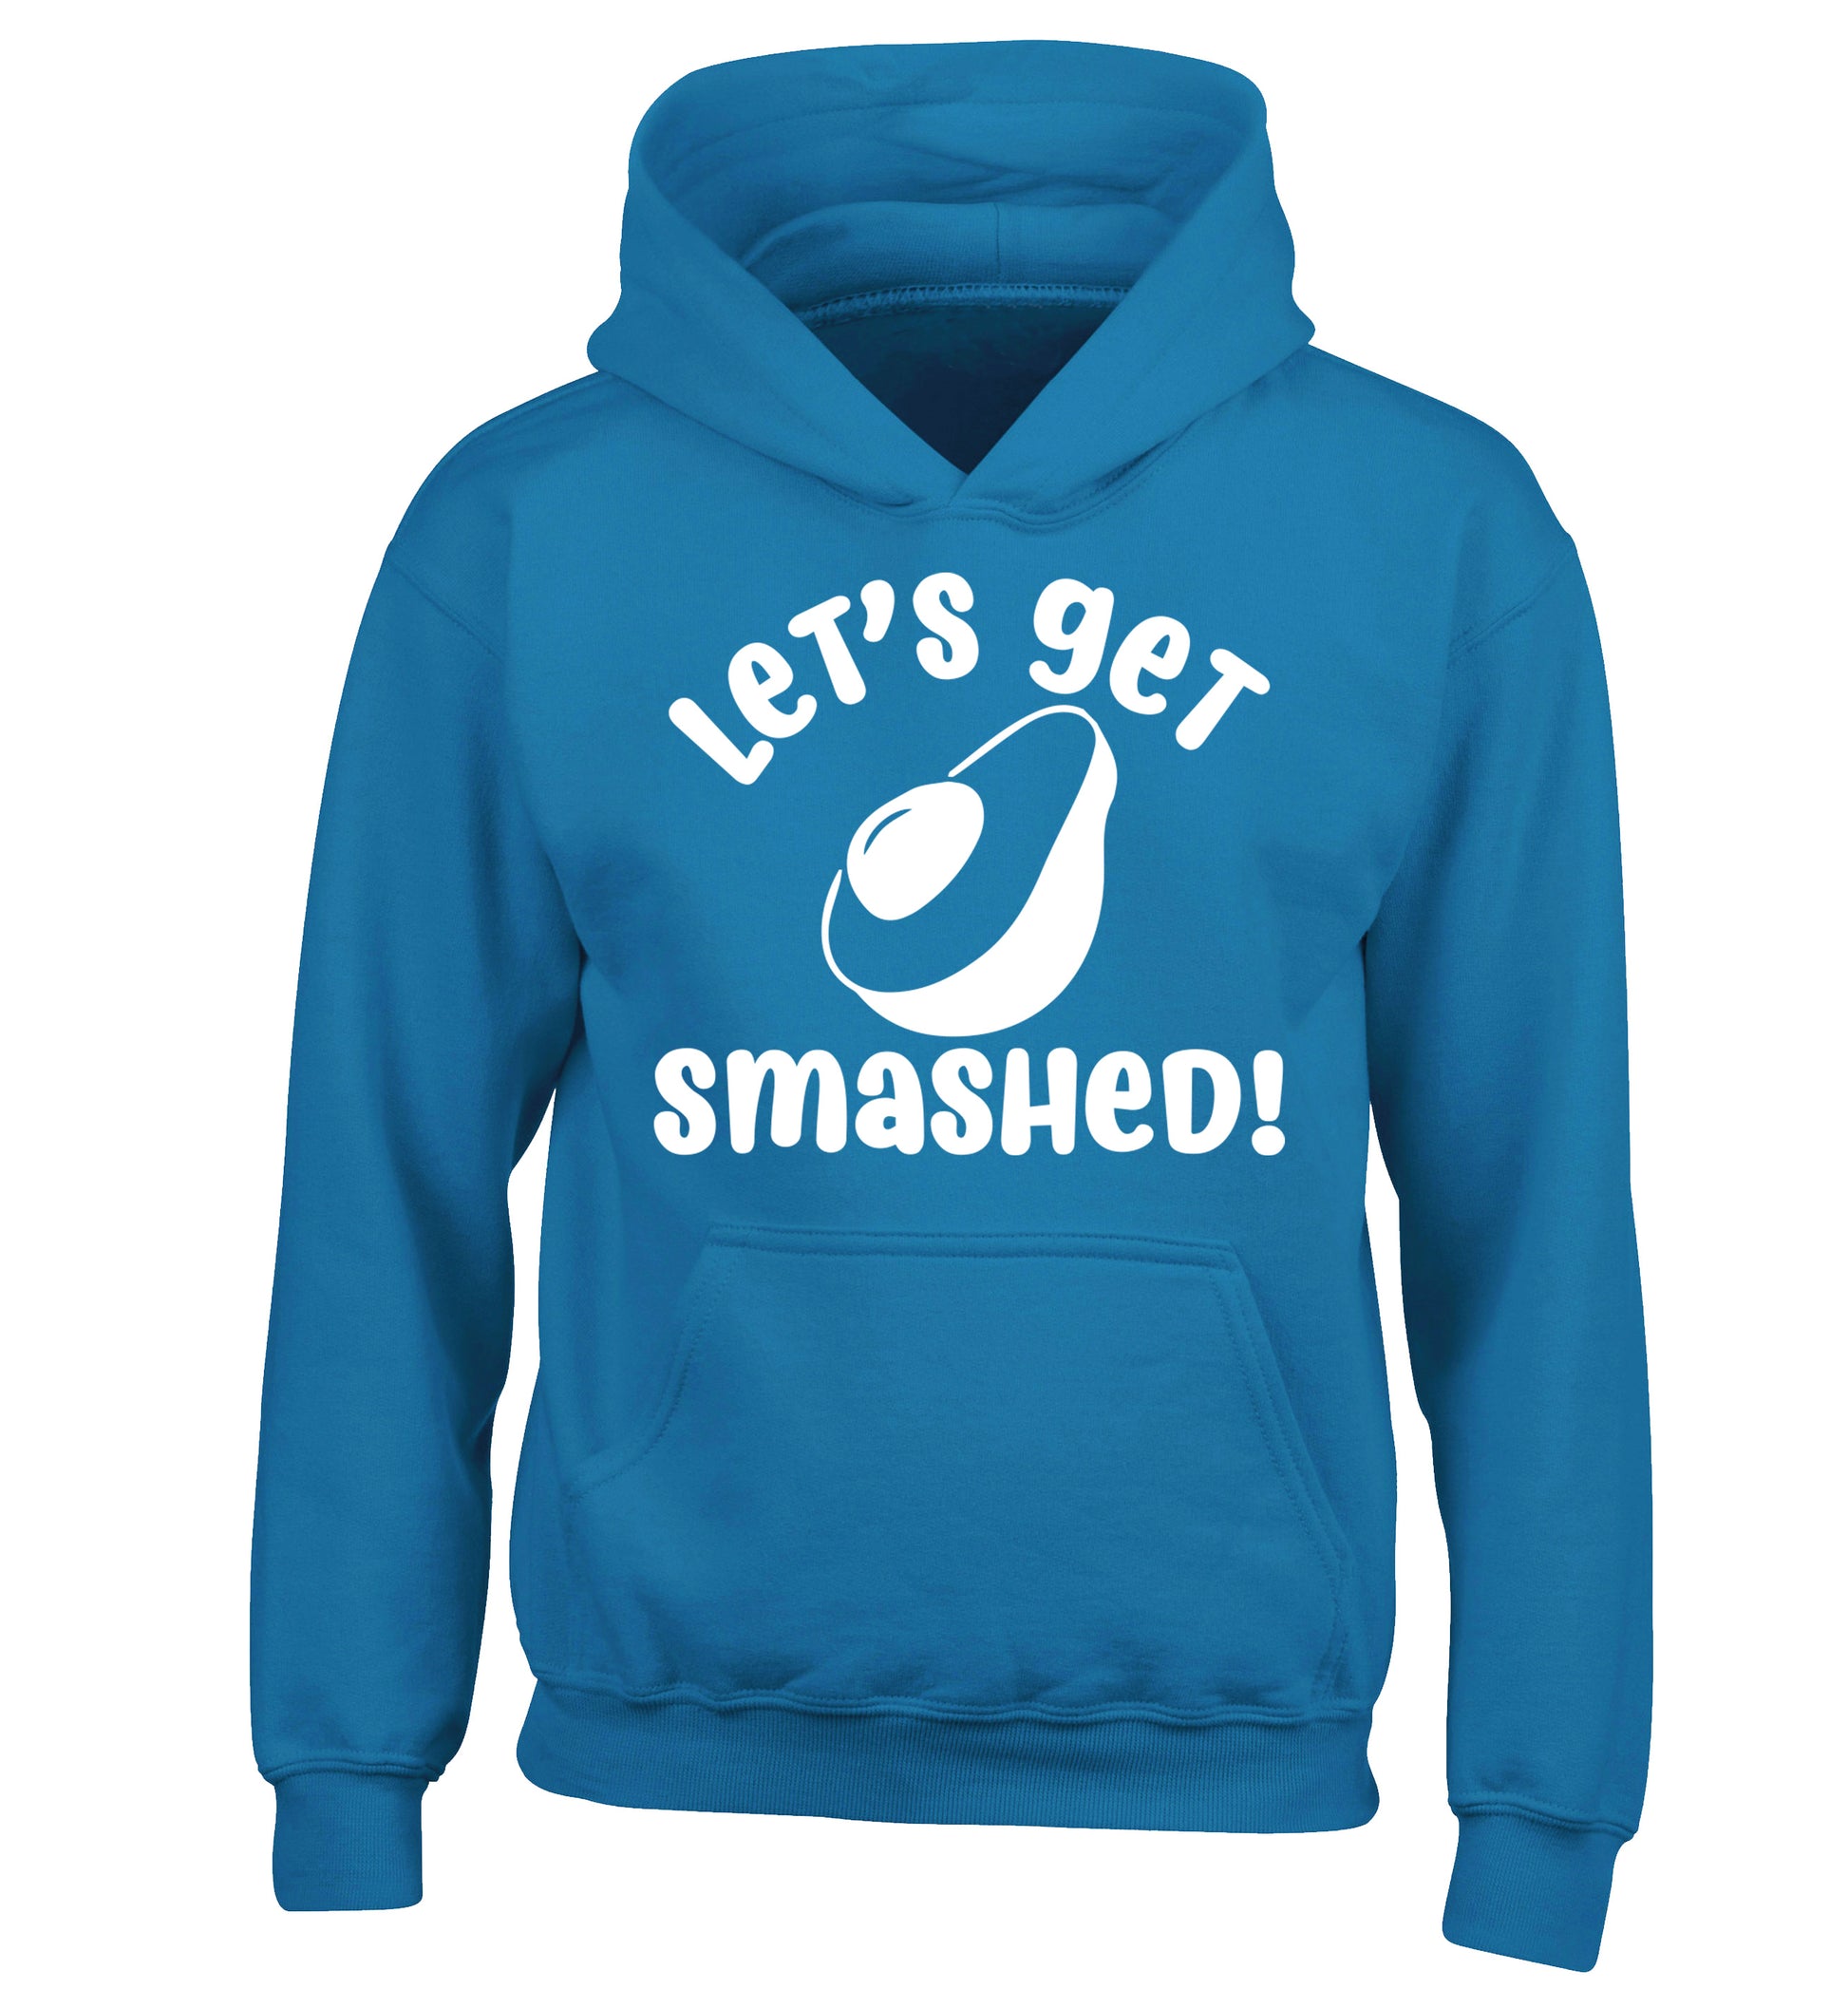 Let's get smashed children's blue hoodie 12-14 Years